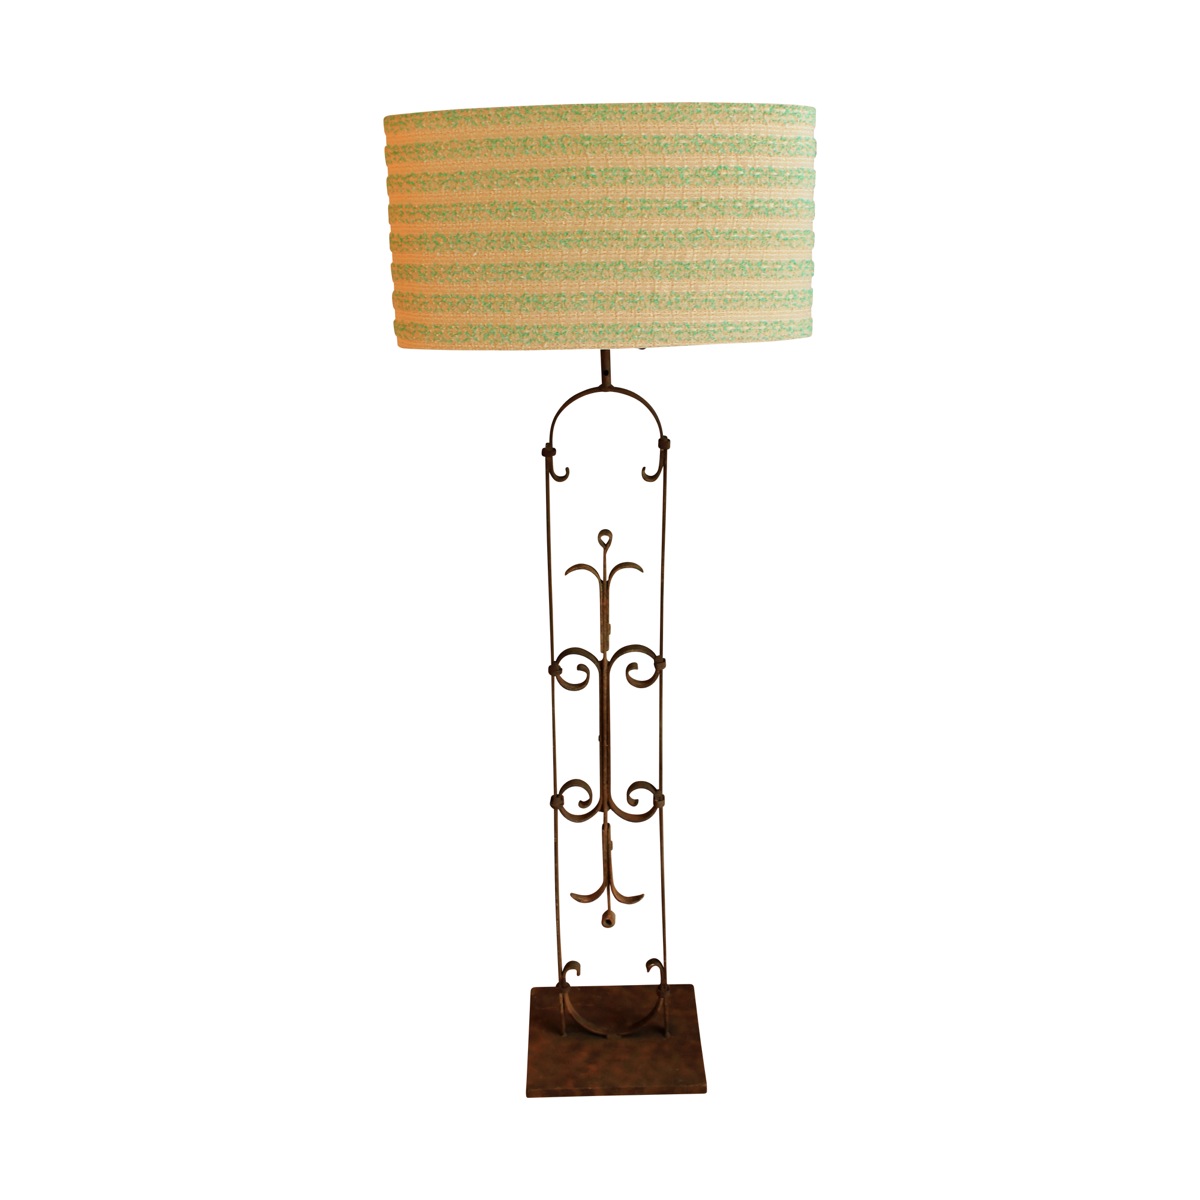 The Mery lamp features a lampshade made of Chanel  fabric, $595.